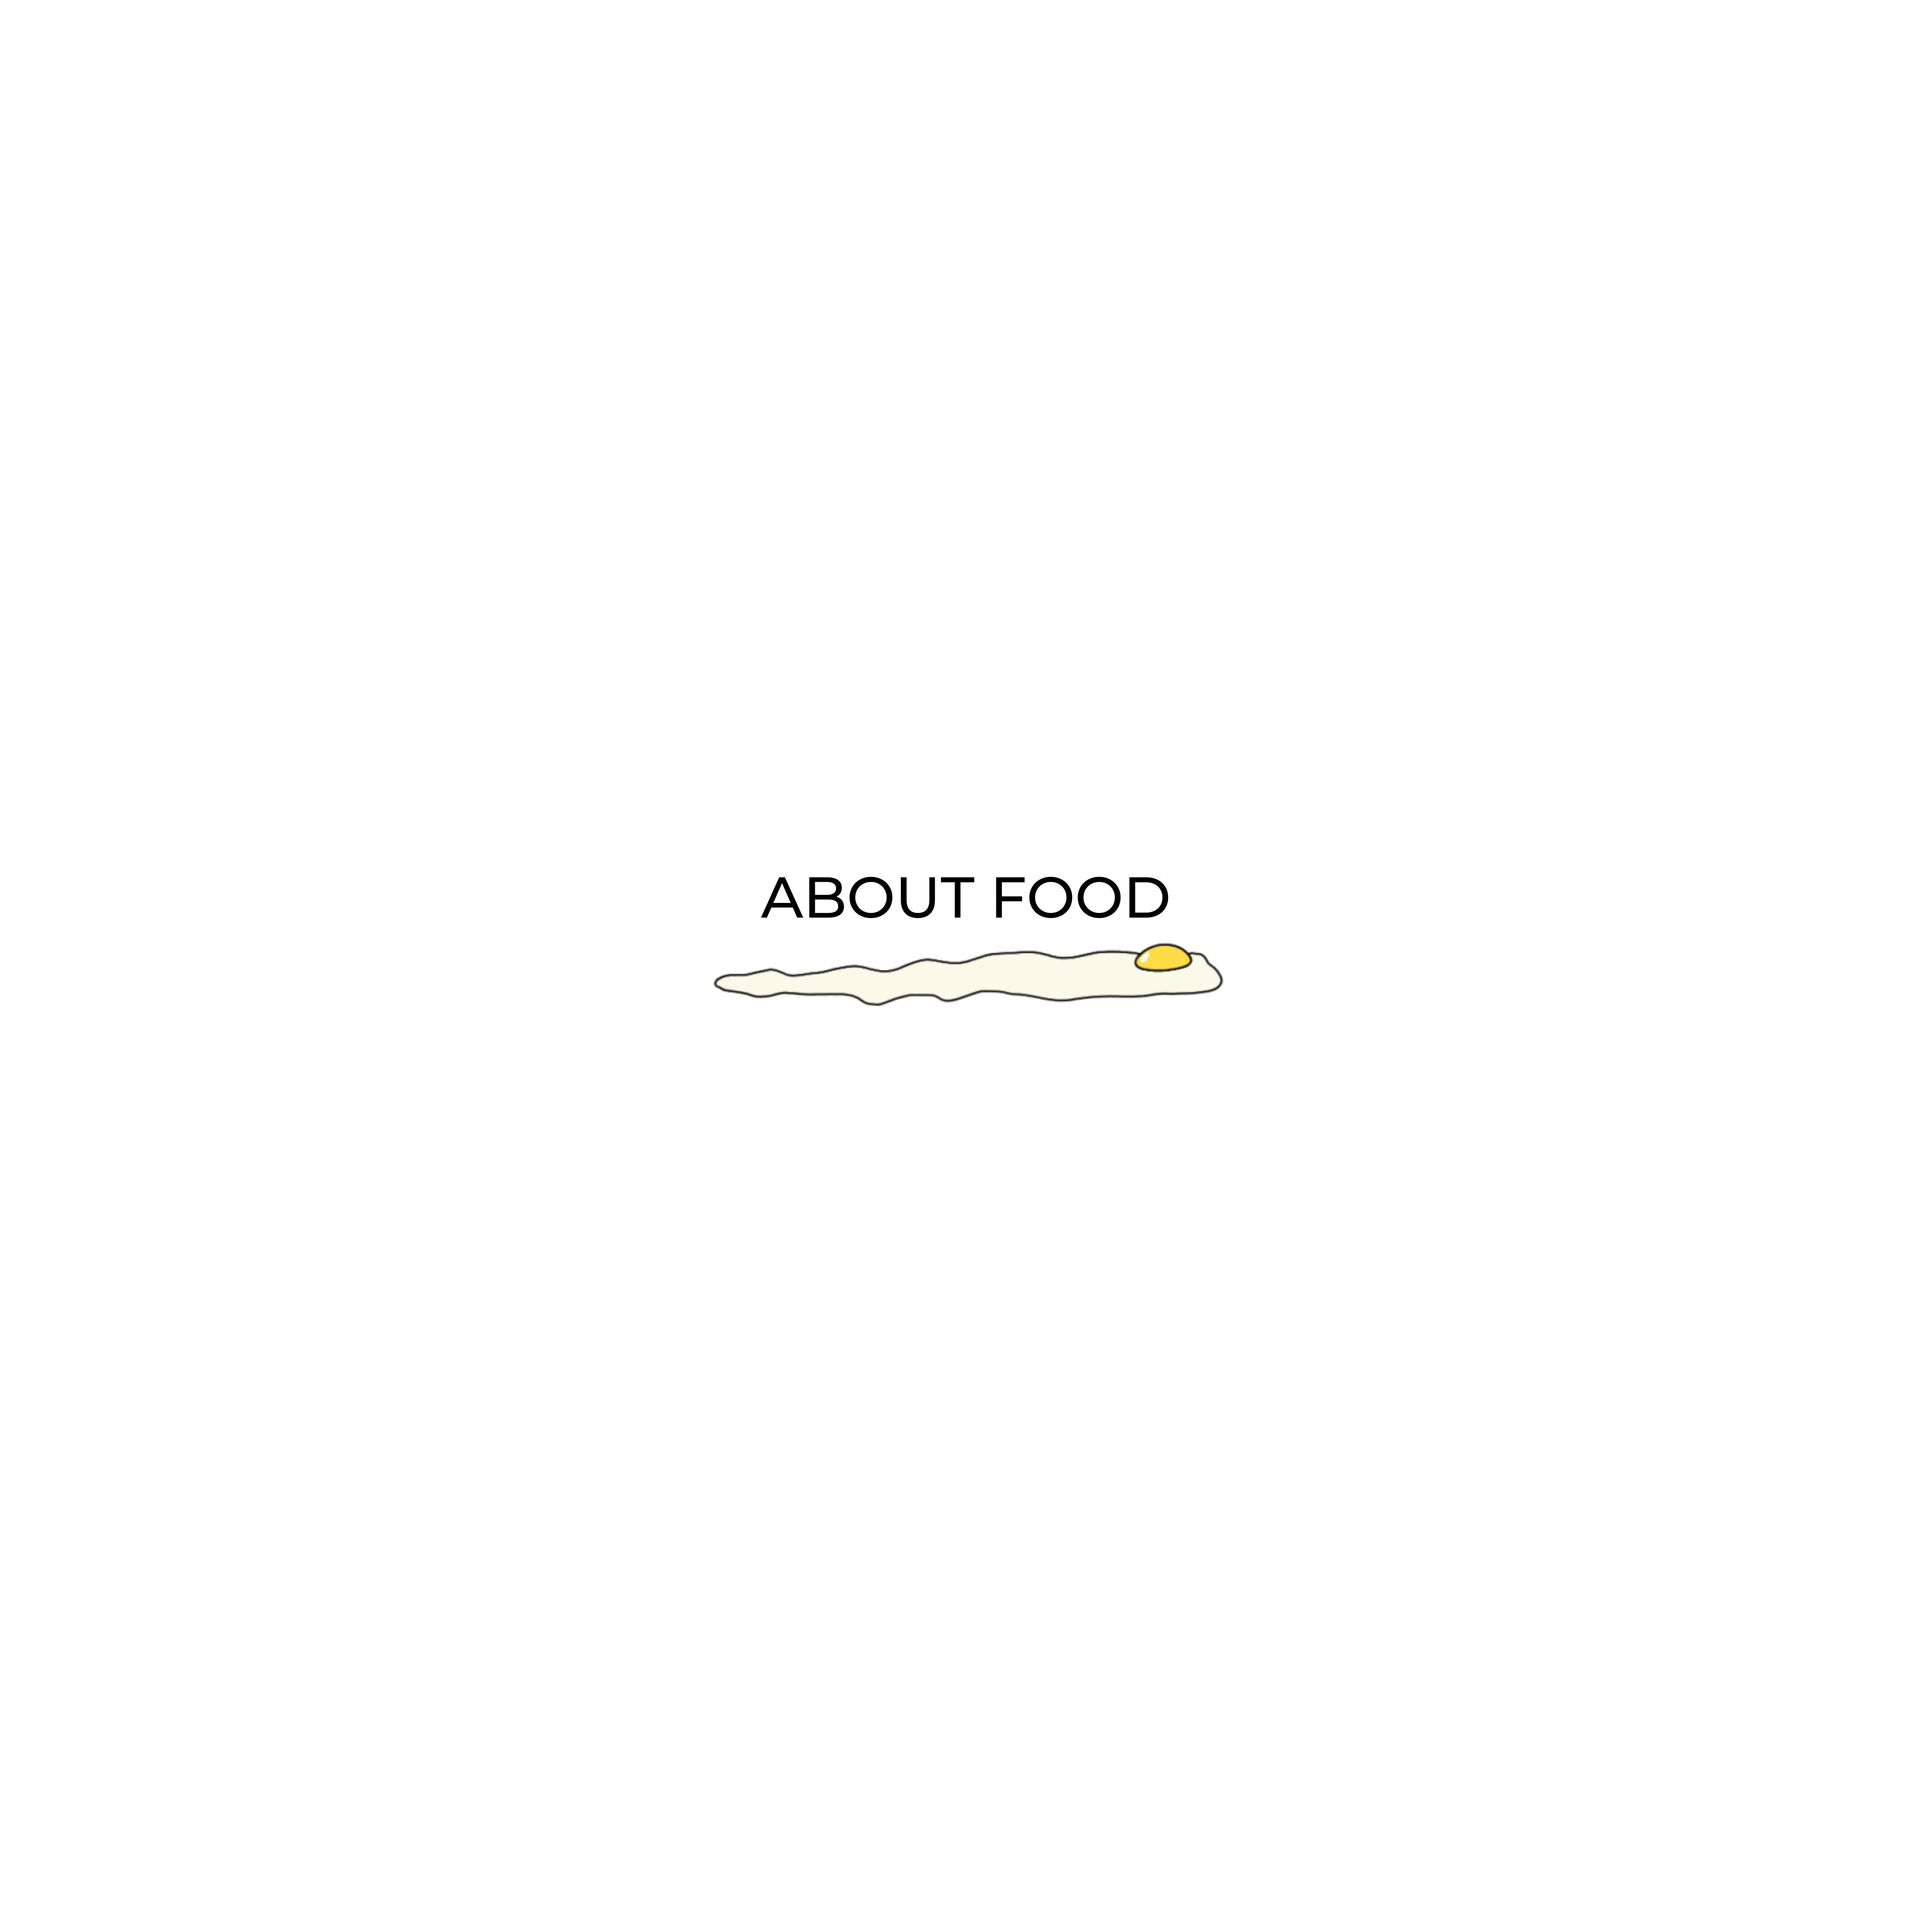 ABOUT FOOD